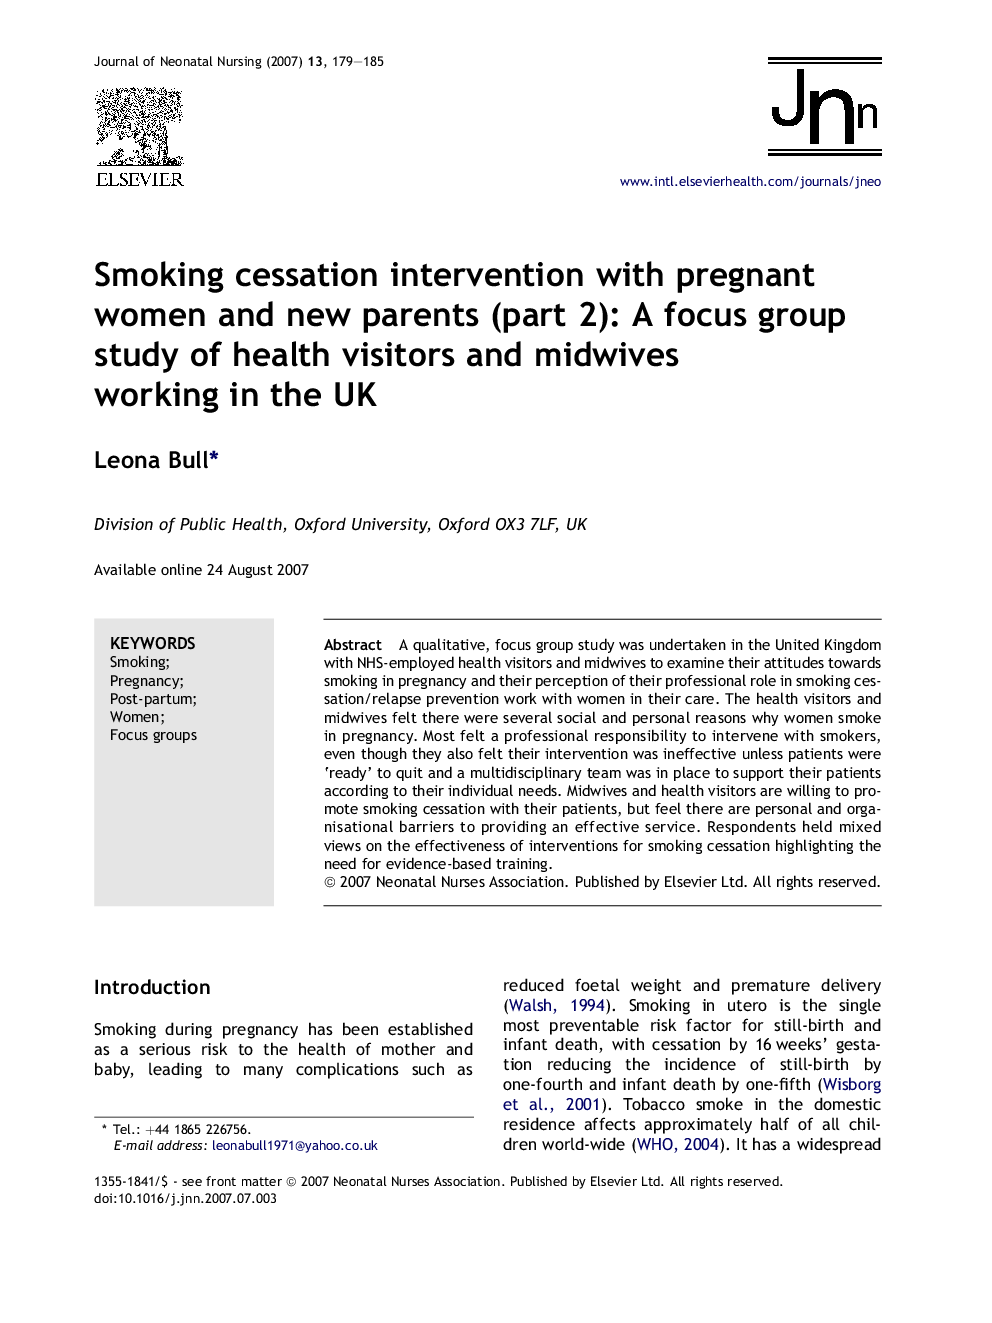 Smoking cessation intervention with pregnant women and new parents (part 2): A focus group study of health visitors and midwives working in the UK